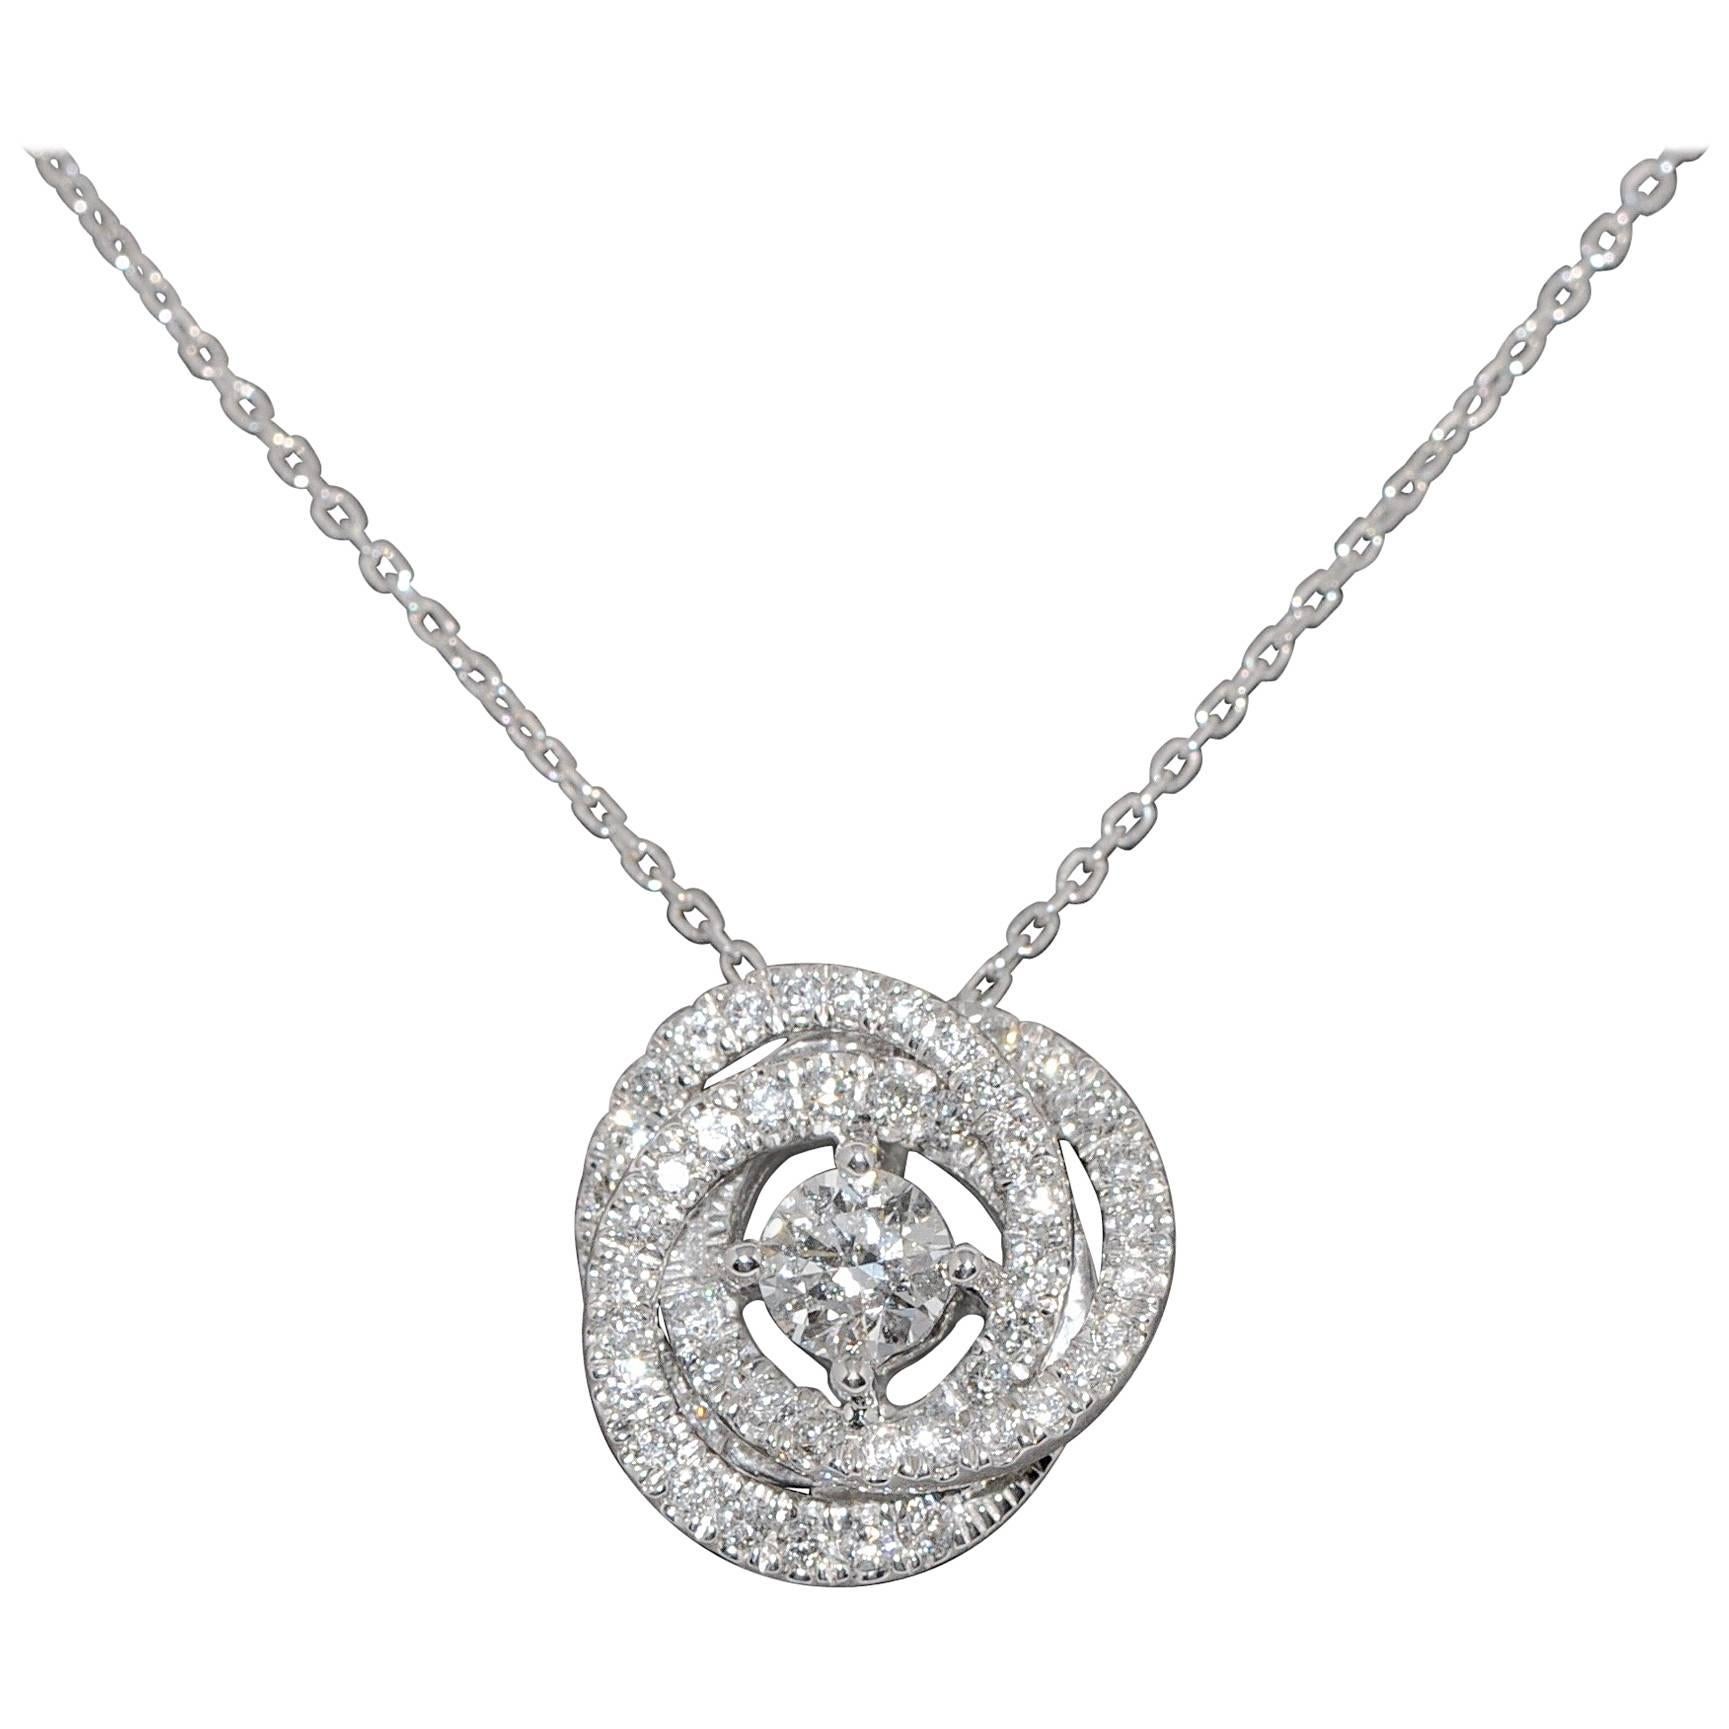 Diamonds G SI and White Gold 18 Carat Pendant Necklace